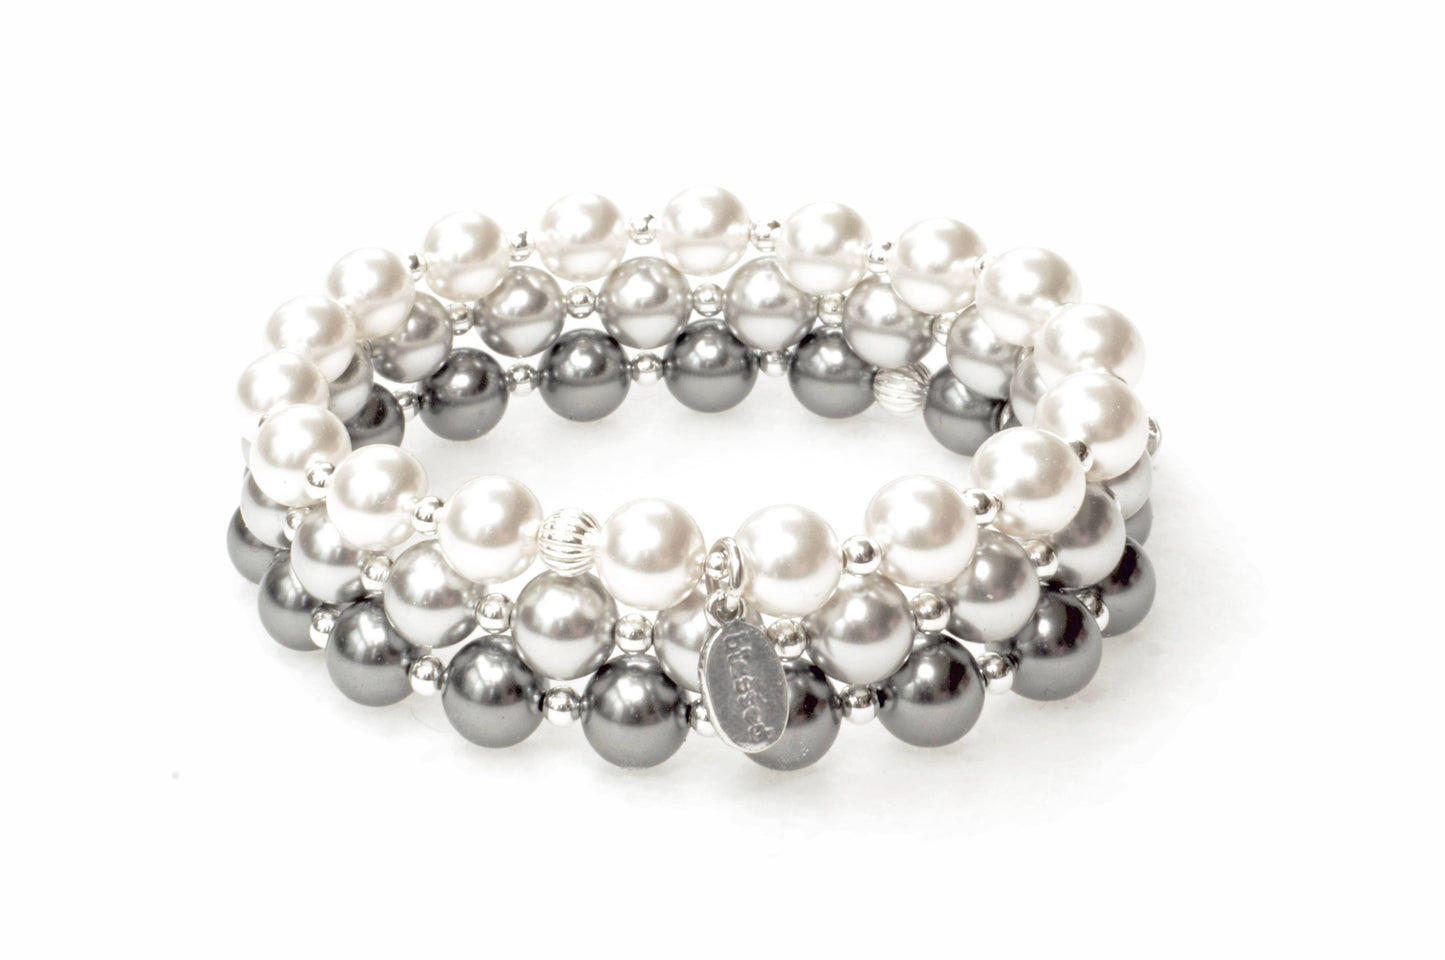 Count Your Blessings Bracelet in White Pearl: L